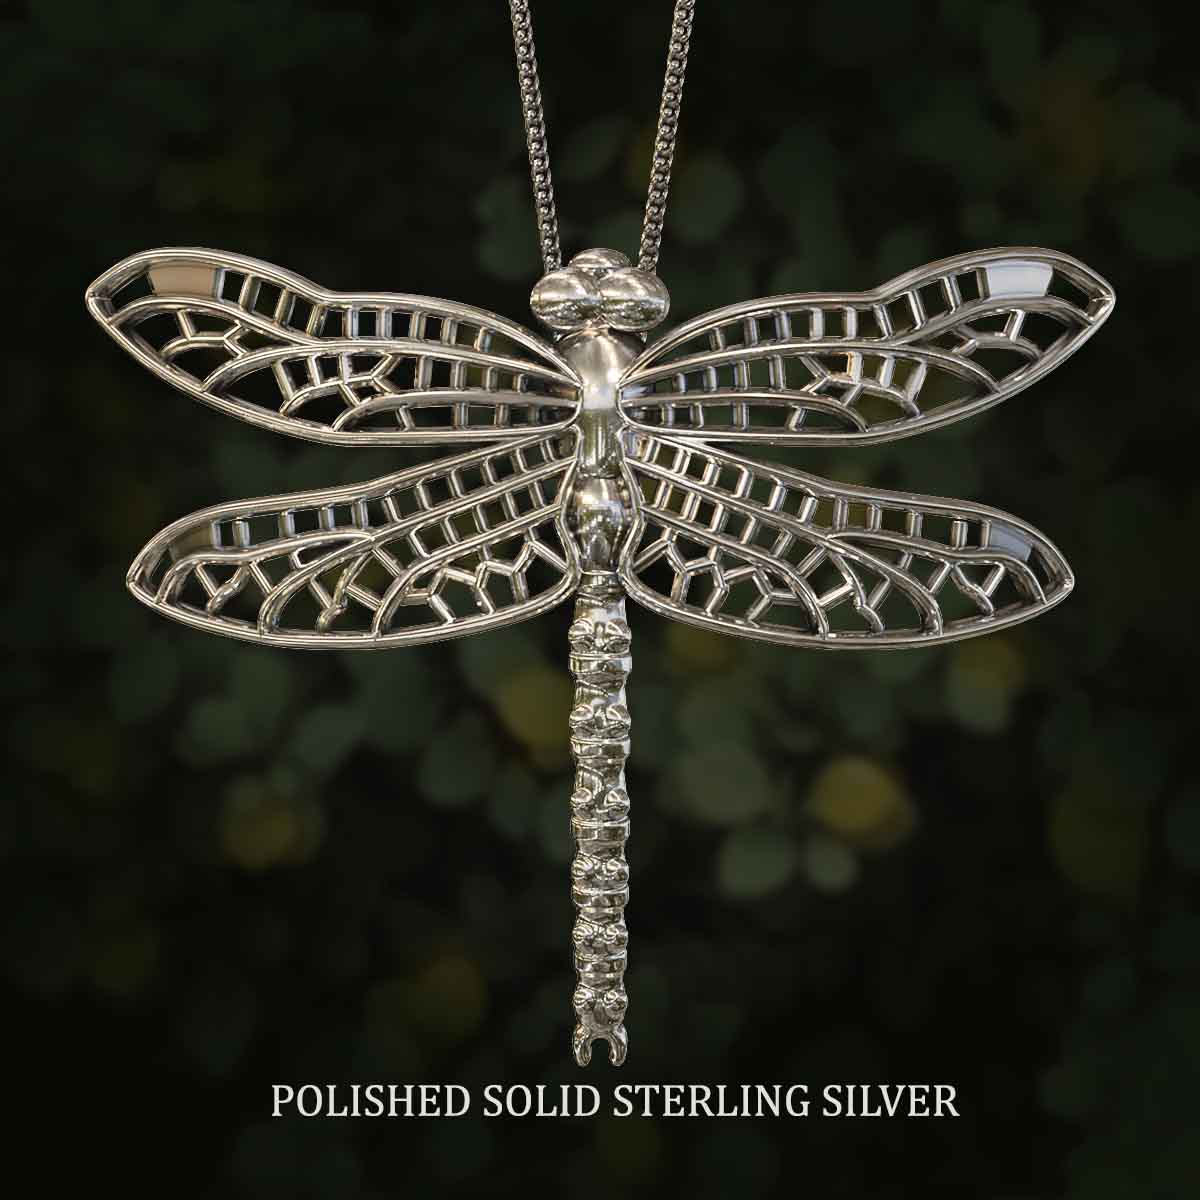     Polished-Solid-Sterling-Silver-Dragonfly-Pendant-Jewelry-For-Necklace